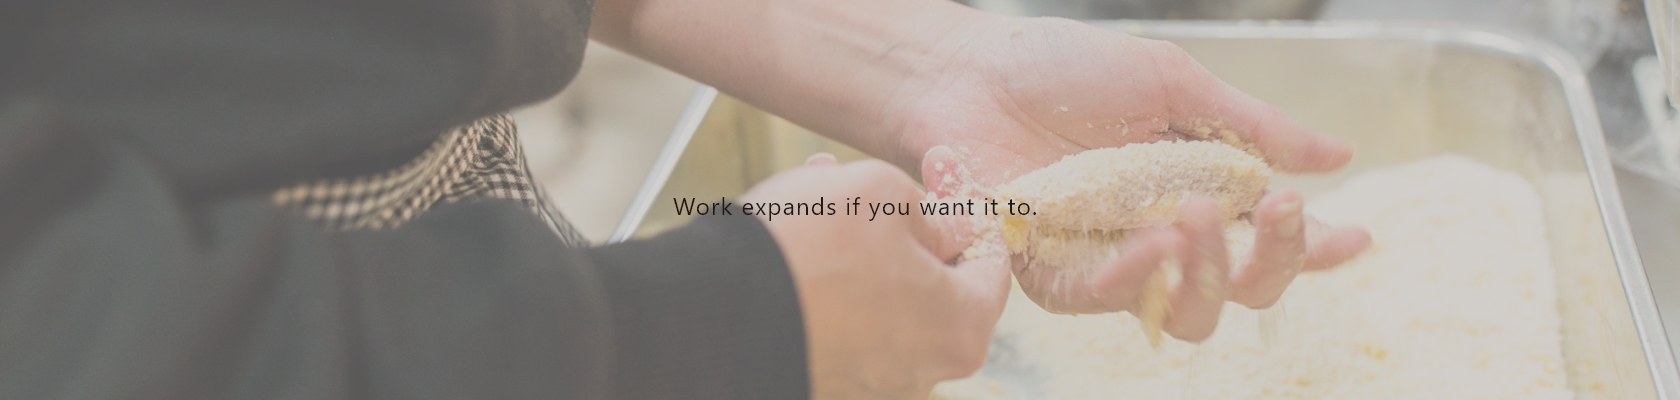 Work expands if you want it to.